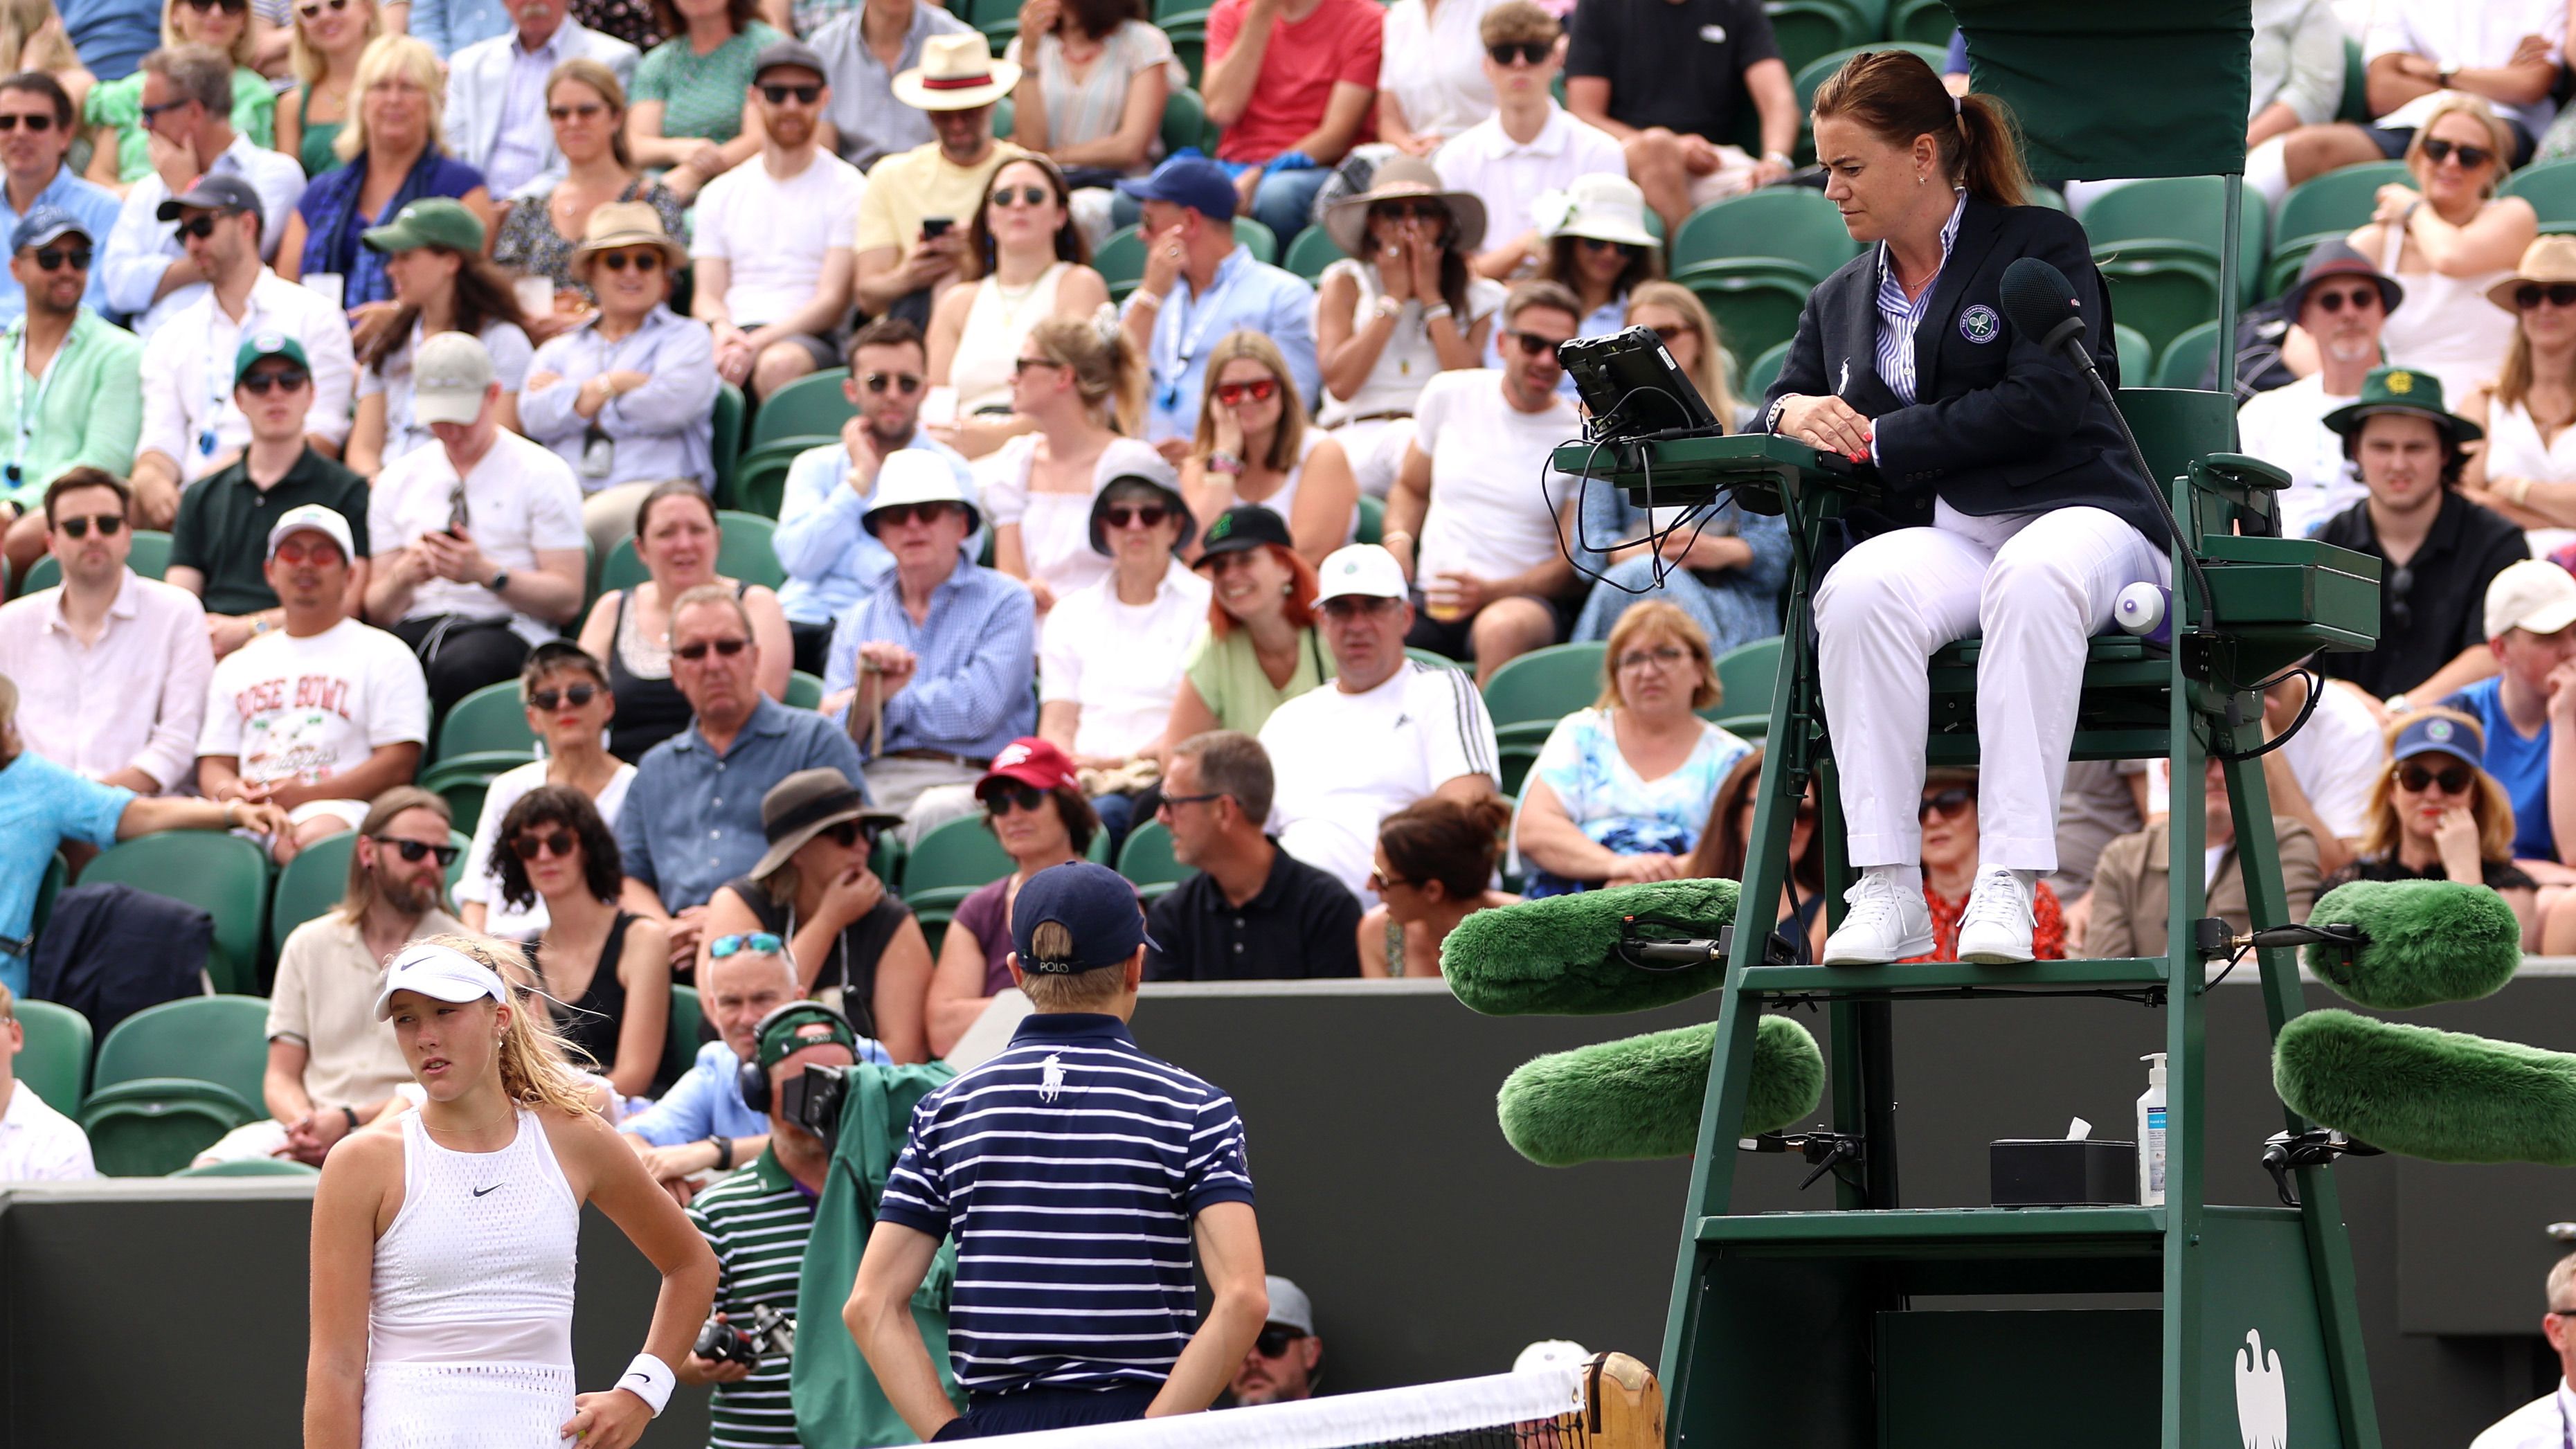 Mirra Andreeva repeatedly questioned the chair umpire for a call she felt was wrong.